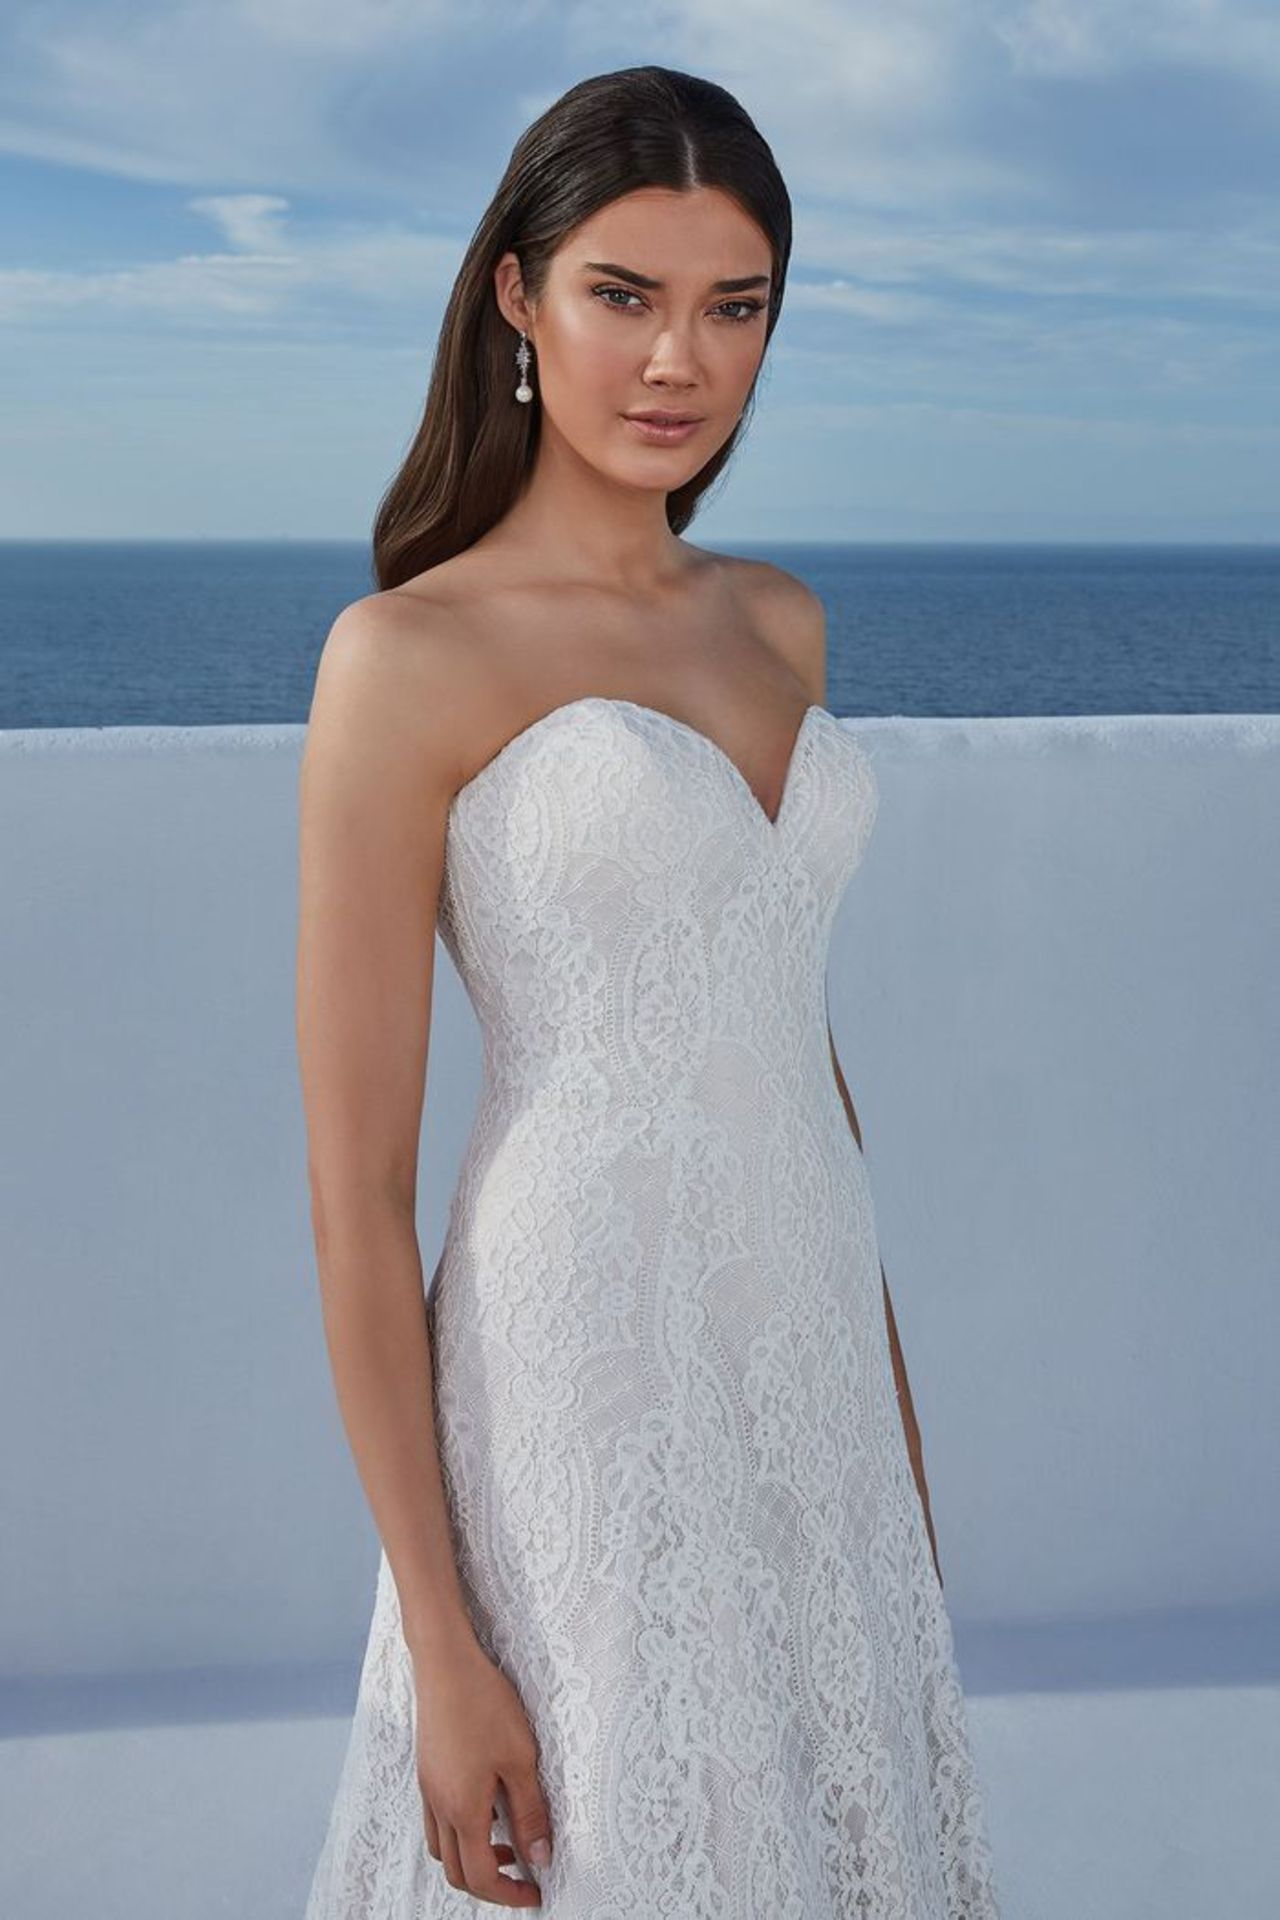 1 x Justin Alexander 'Bethany' Allover Lace A-Line Sweetheart Wedding Dress - Size 18 - RRP £1,450 - Image 3 of 4